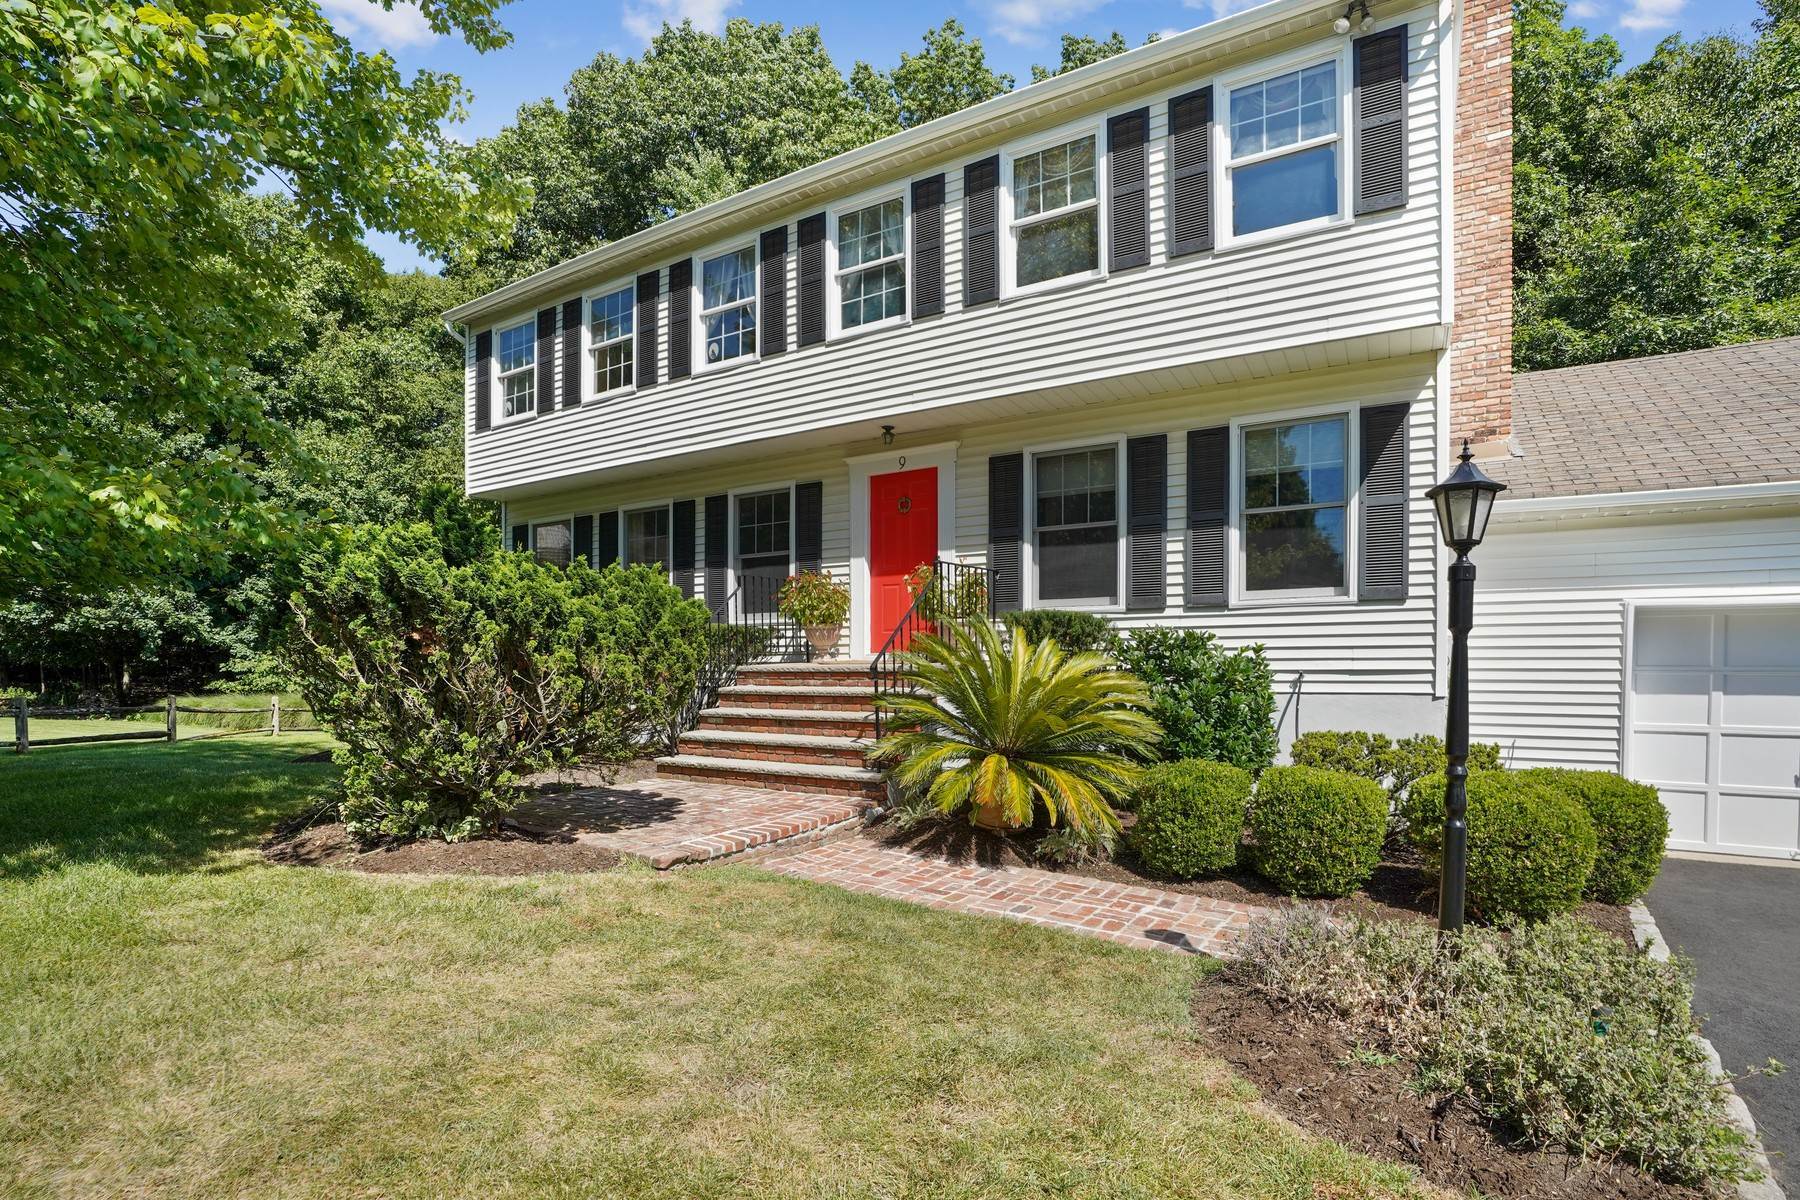 Single Family Homes for Sale at End of Double Cul-de-sac 9 Marti Rd., Park Ridge, New Jersey 07656 United States